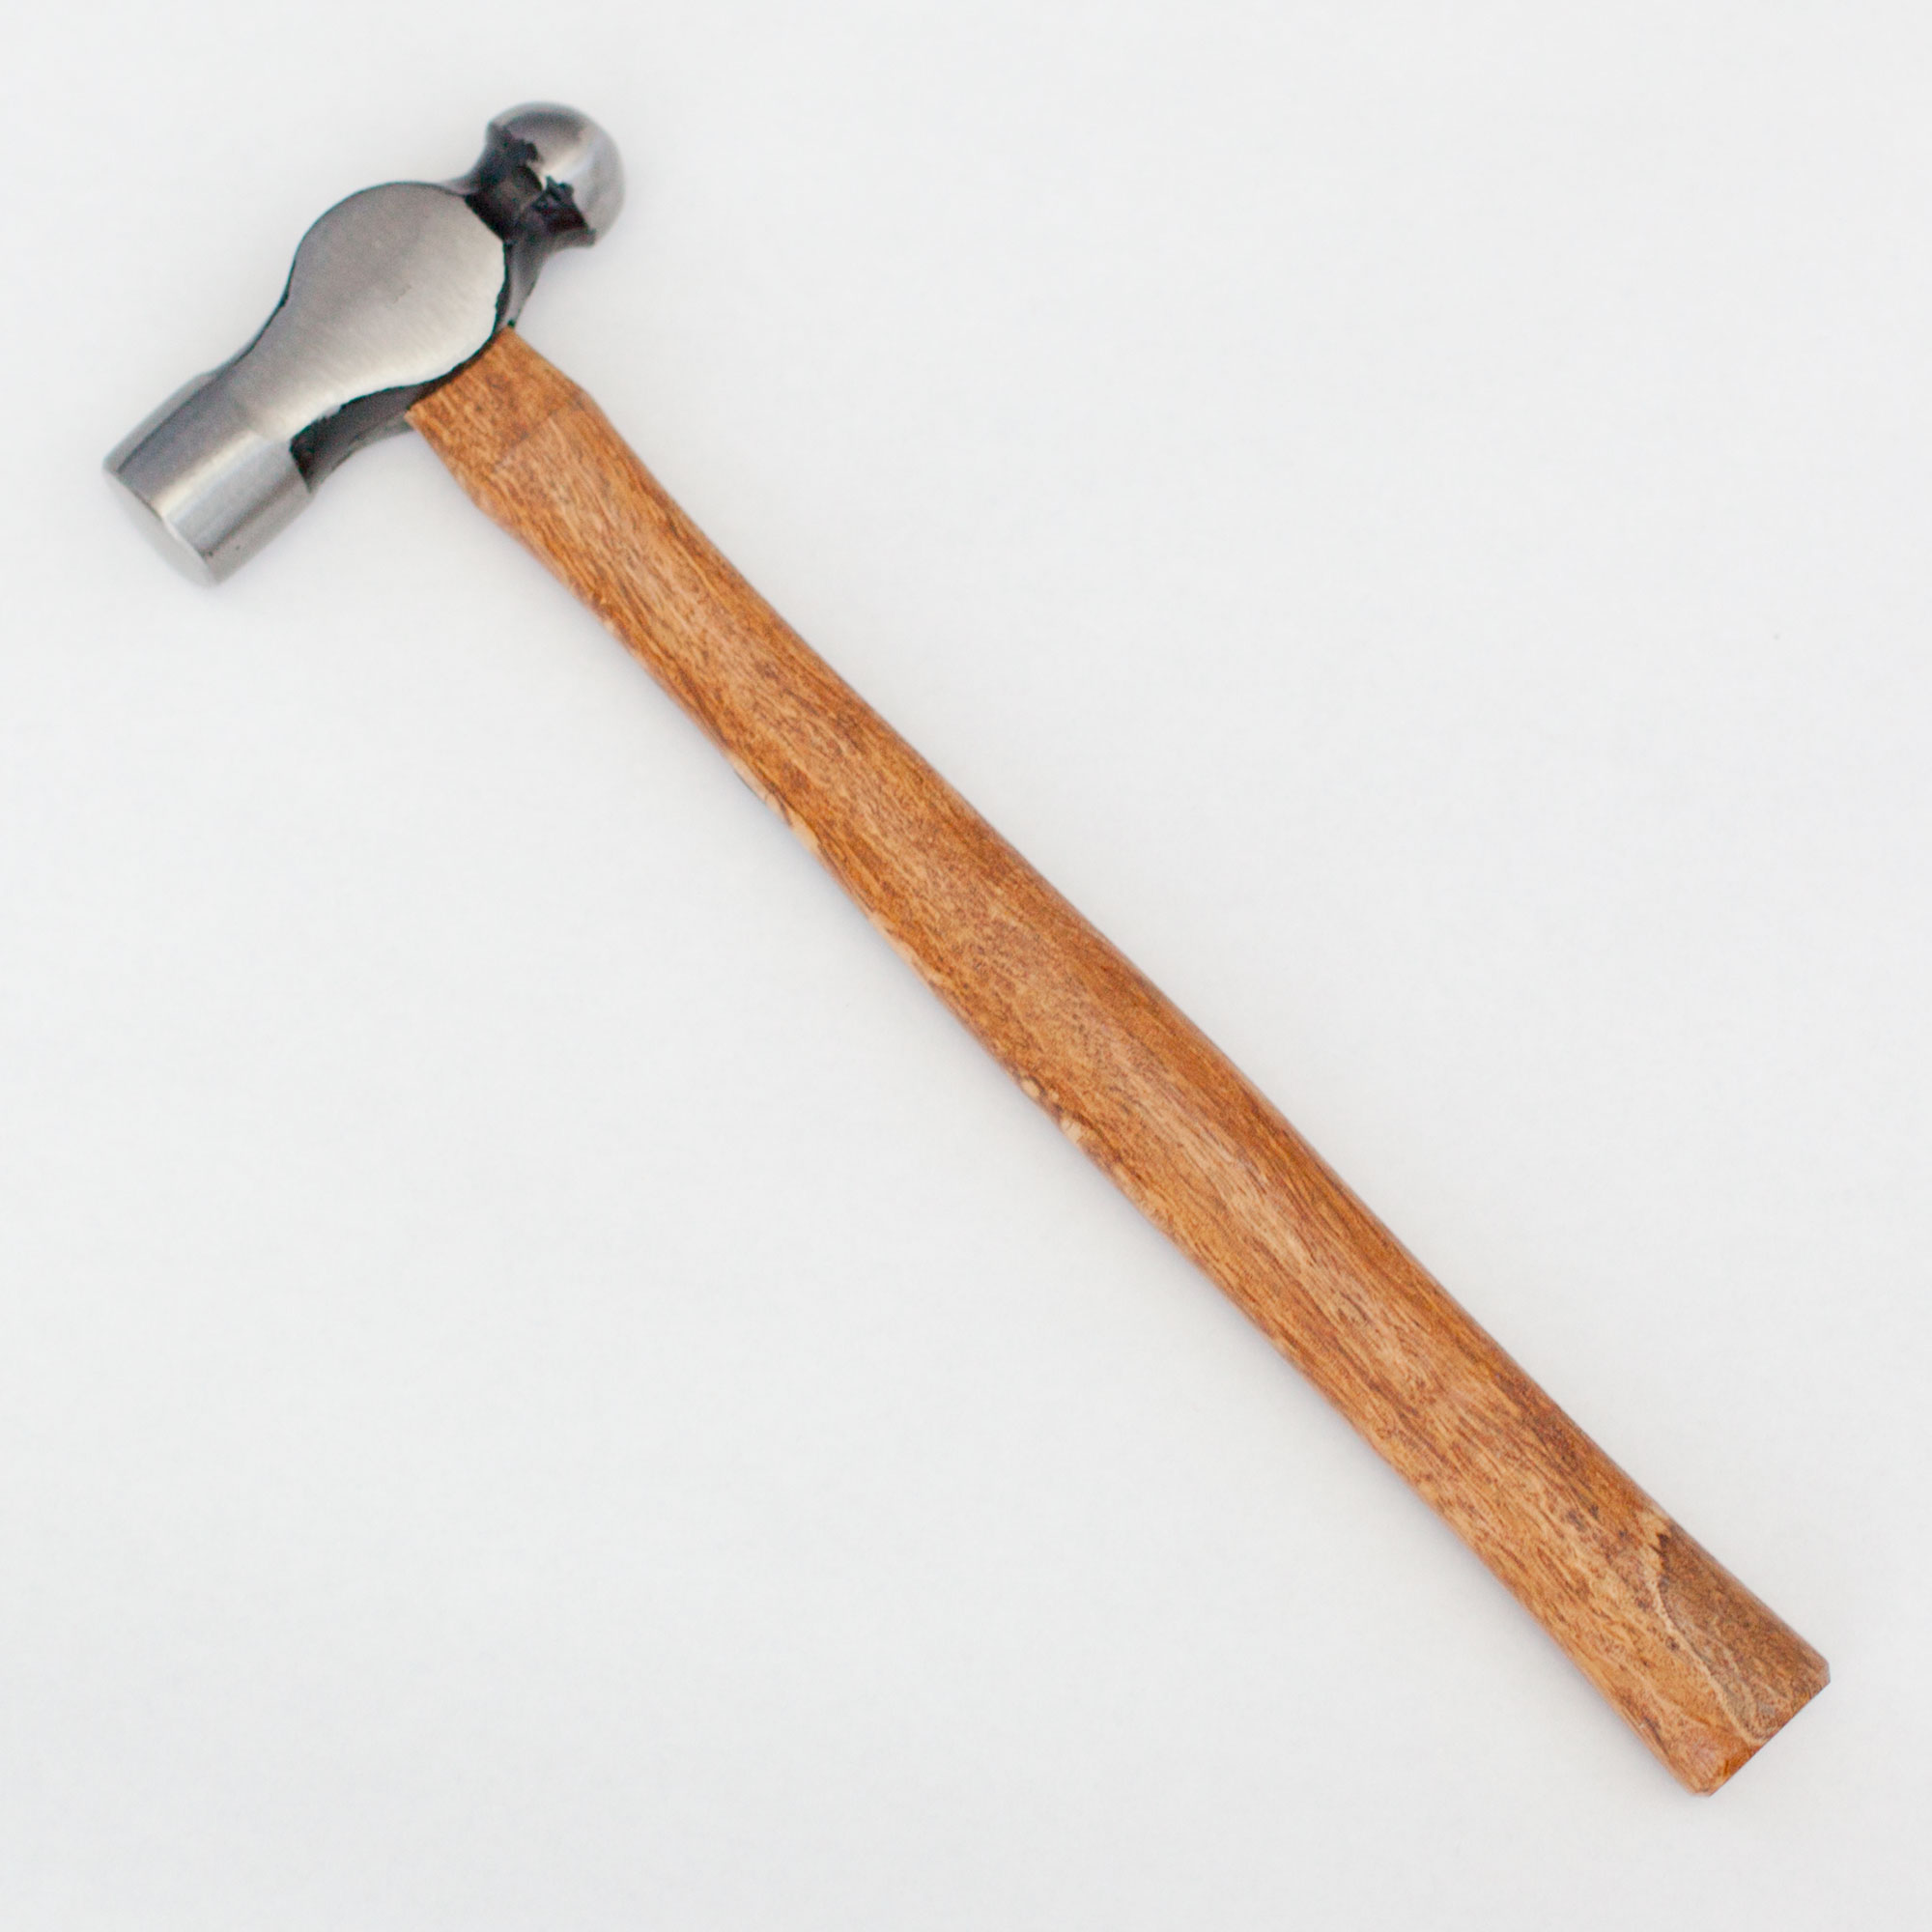 A beginner’s guide to hammers – Boing Boing